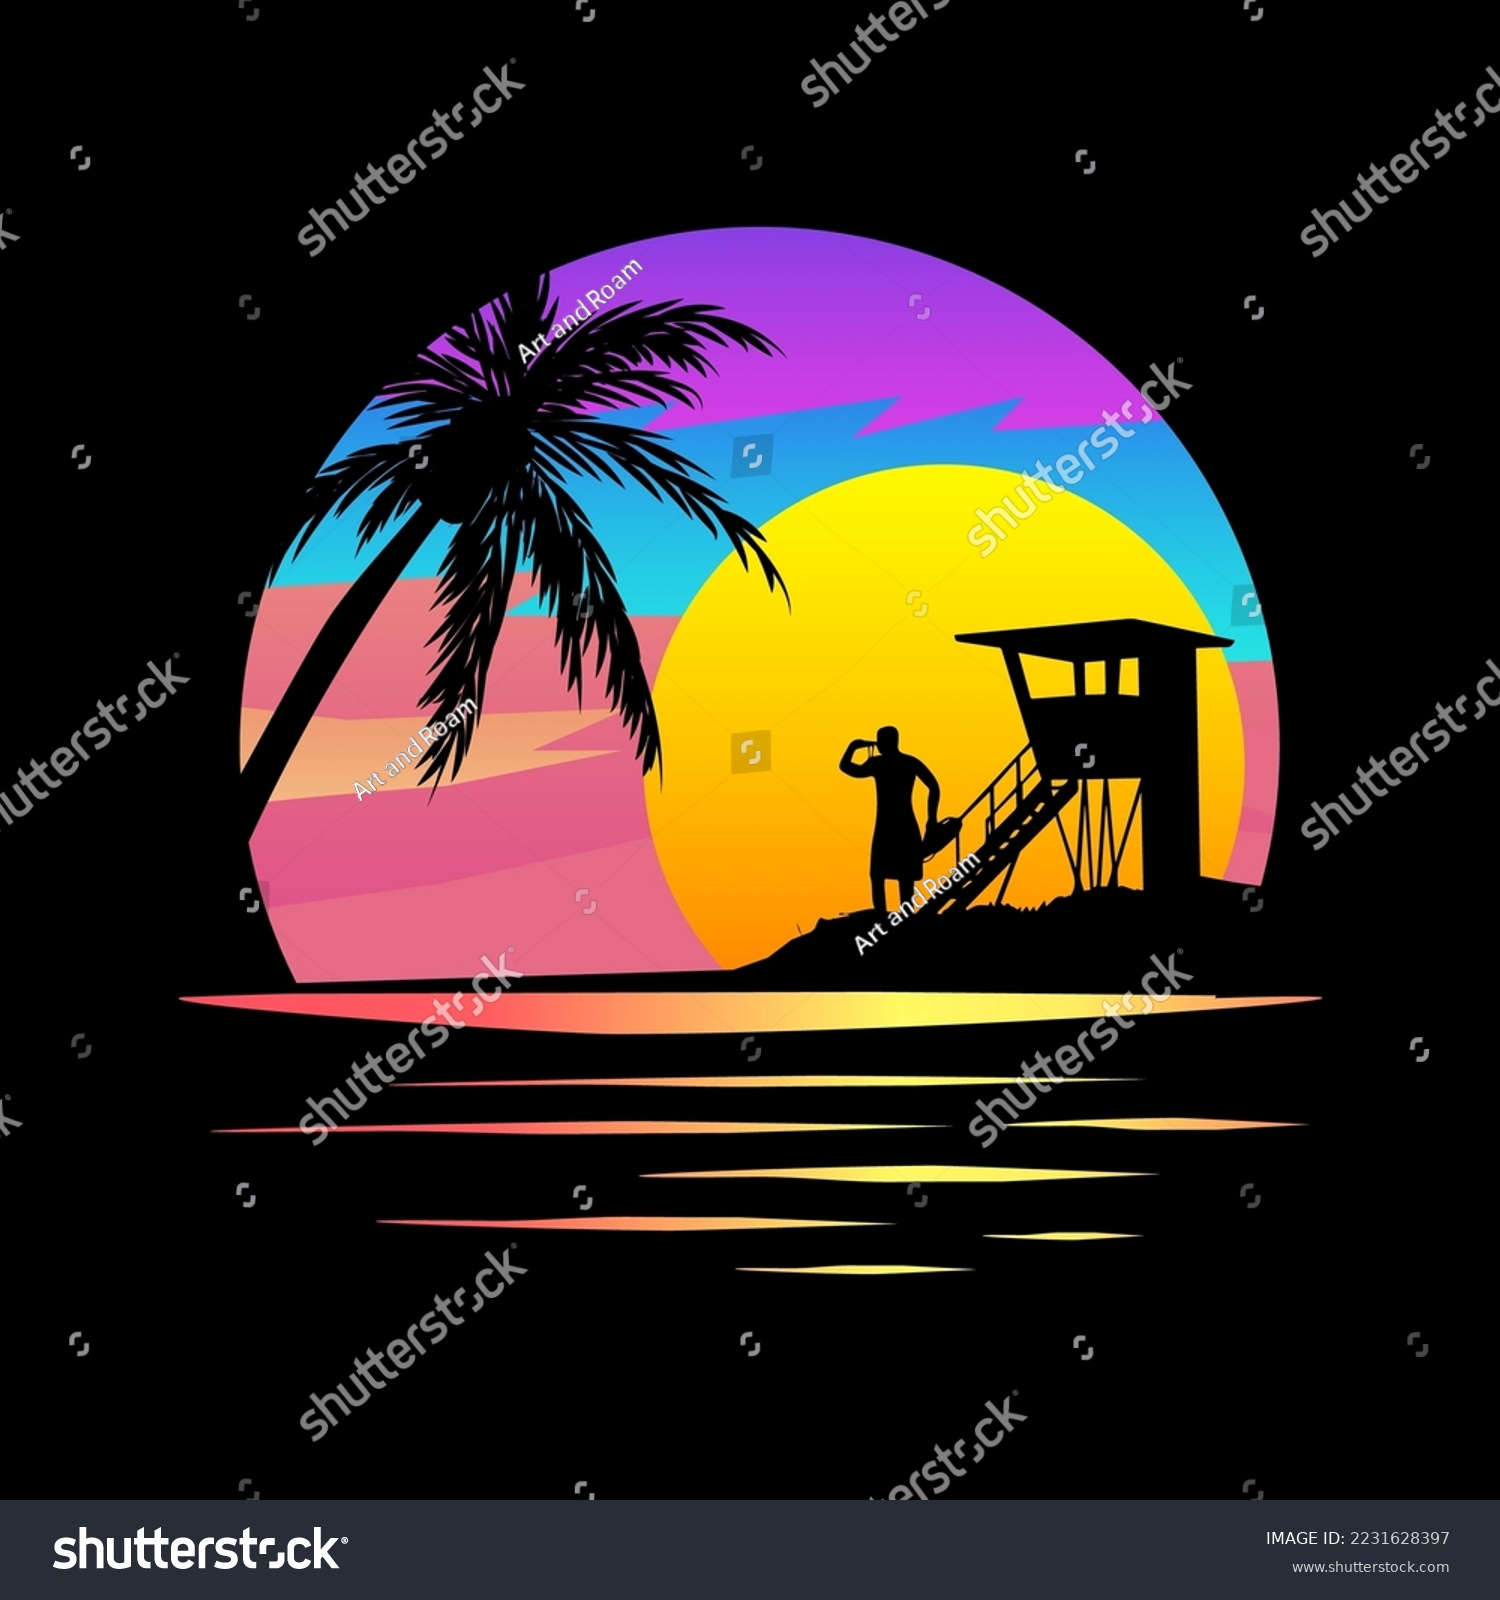 SVG of Baywatch  Apparel Graphic. Sunset on Tropical island. Vector graphic, black silhouette on vivid, colourful background. Palm trees, life guard and beach. Tshirt print ready graphic. svg